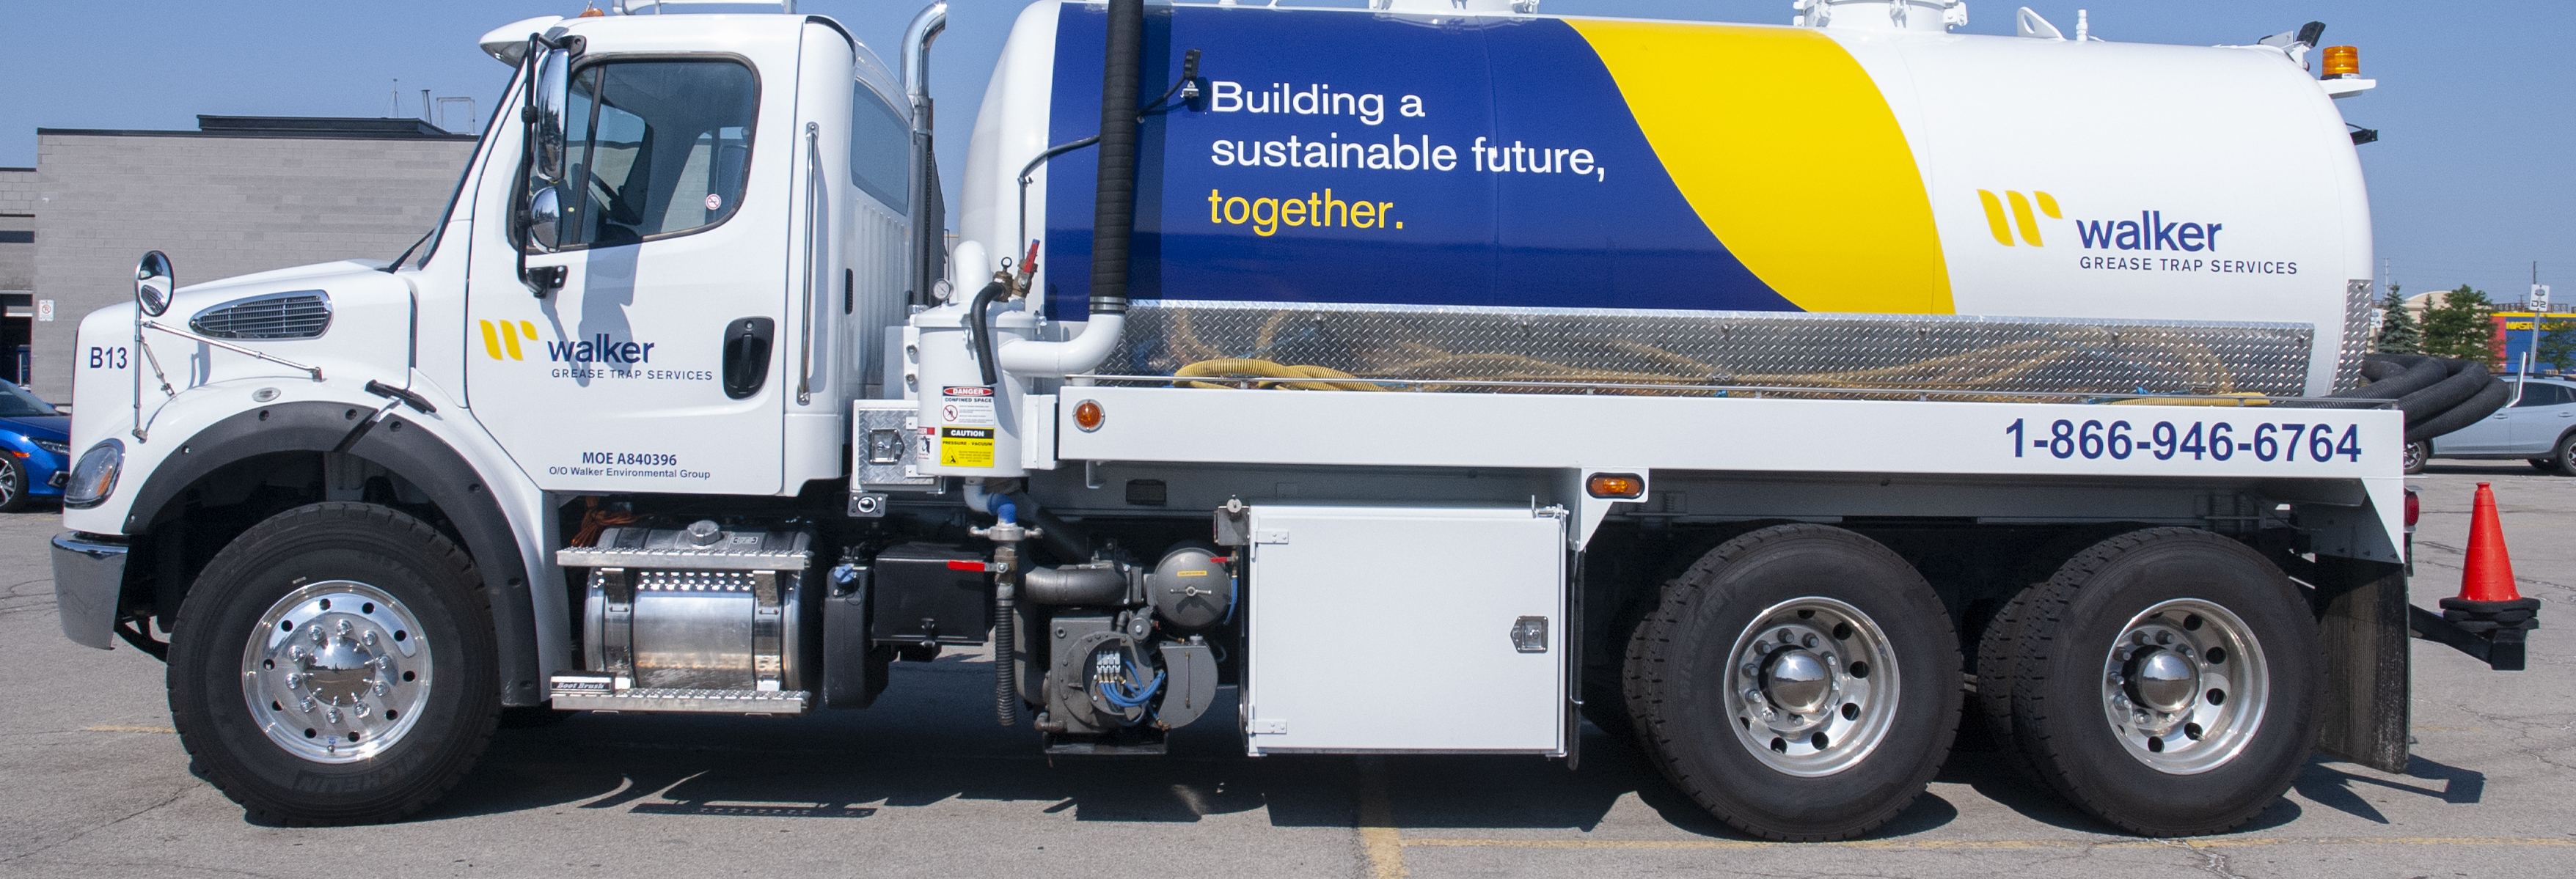 Walker Truck: Building a sustainable future, together